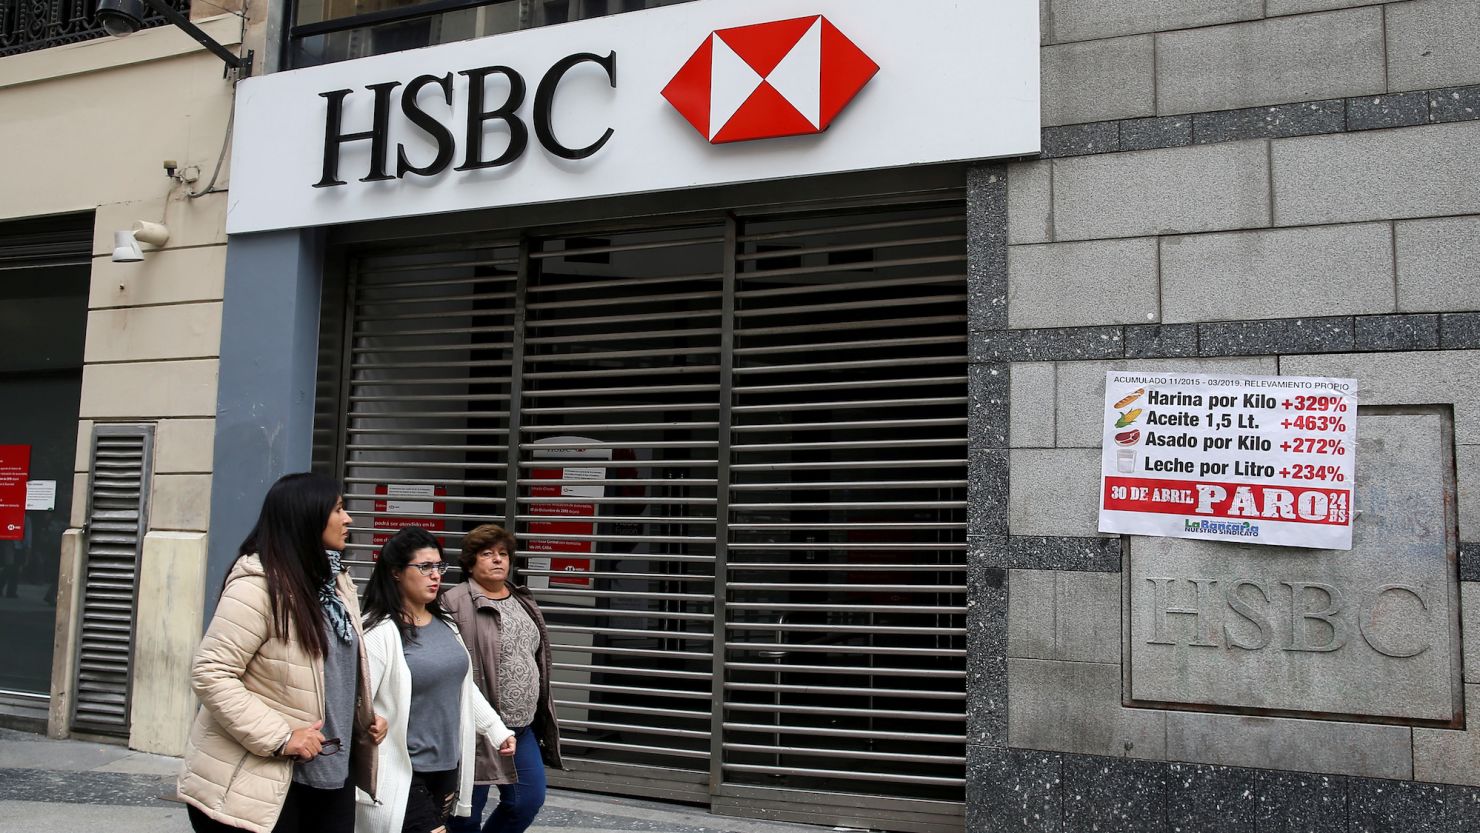 Pedestrians walk past a closed HSBC branch during a national strike in Buenos Aires, Argentina.